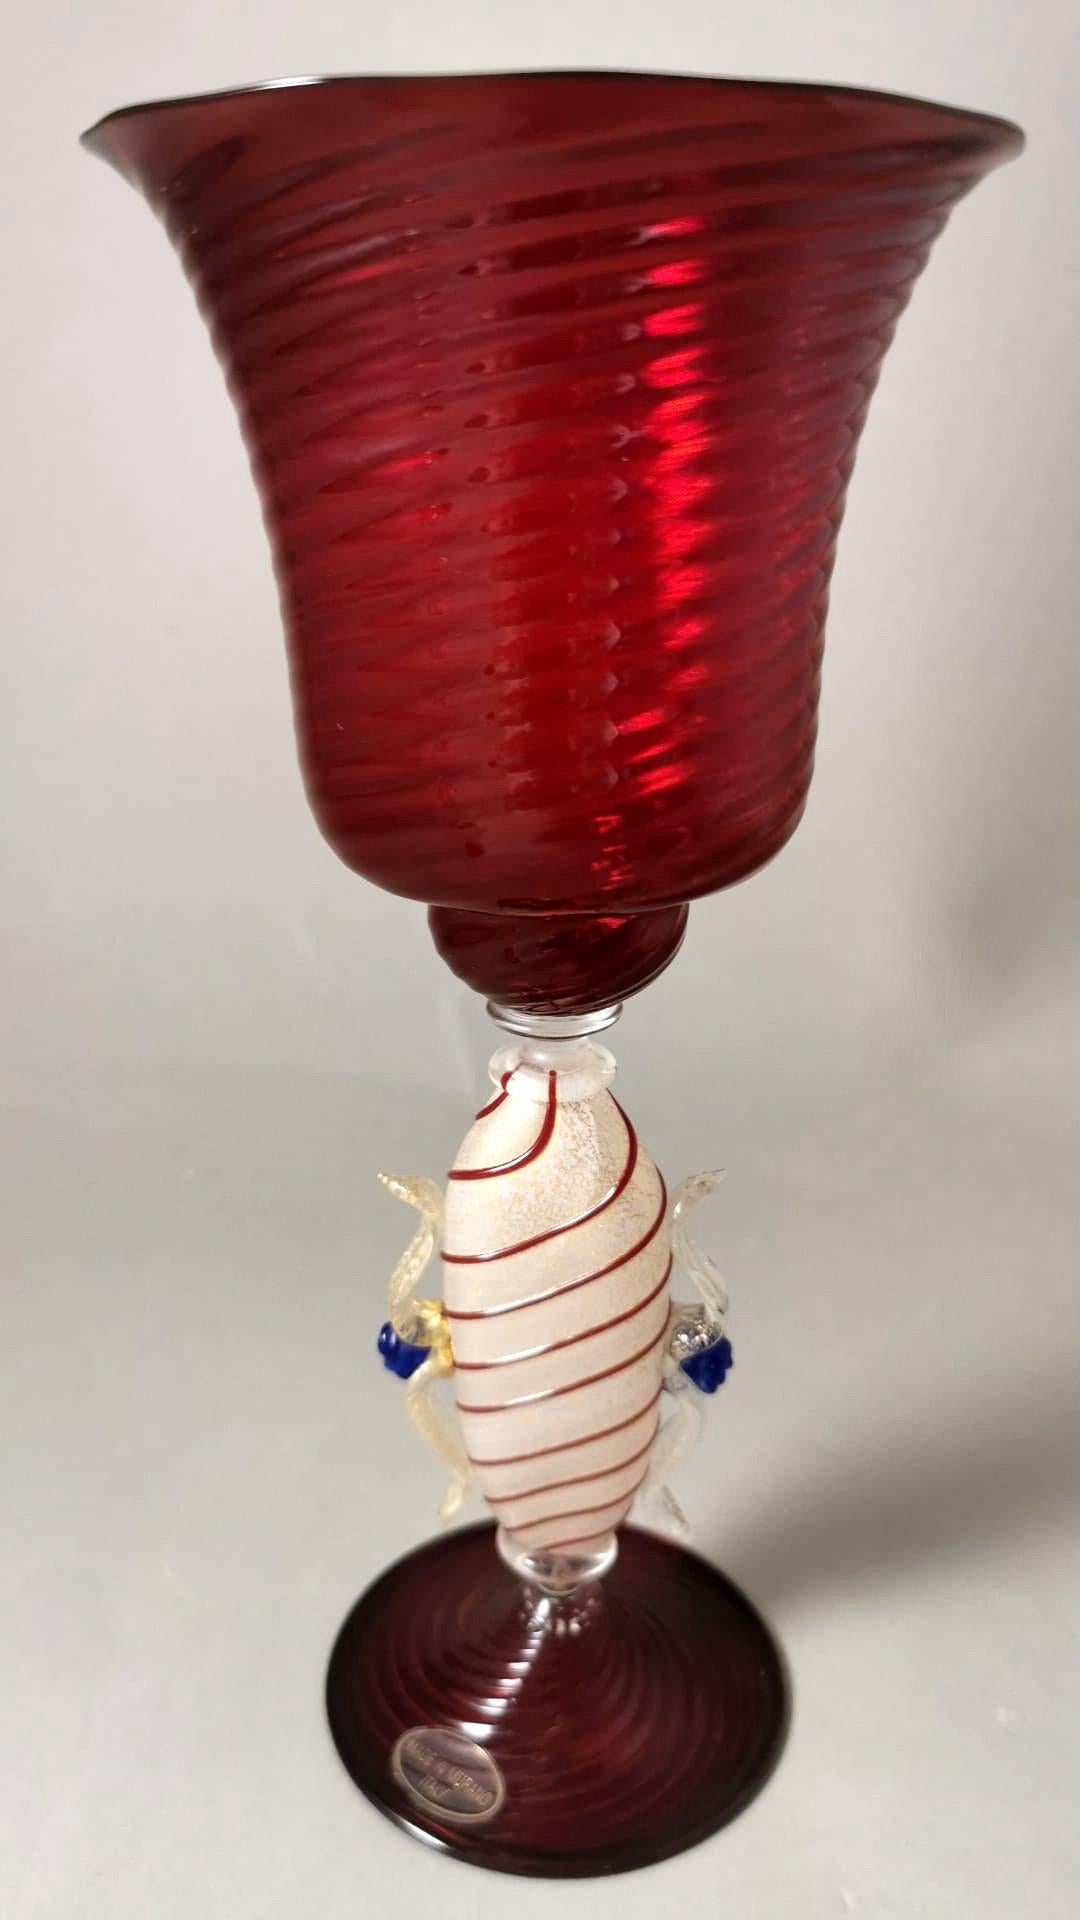 We kindly suggest that you read the entire description, as with it we try to give you detailed technical and historical information to guarantee the authenticity of our objects.
Exceptional hot-blown Murano glass goblet; it has a rare stem worked